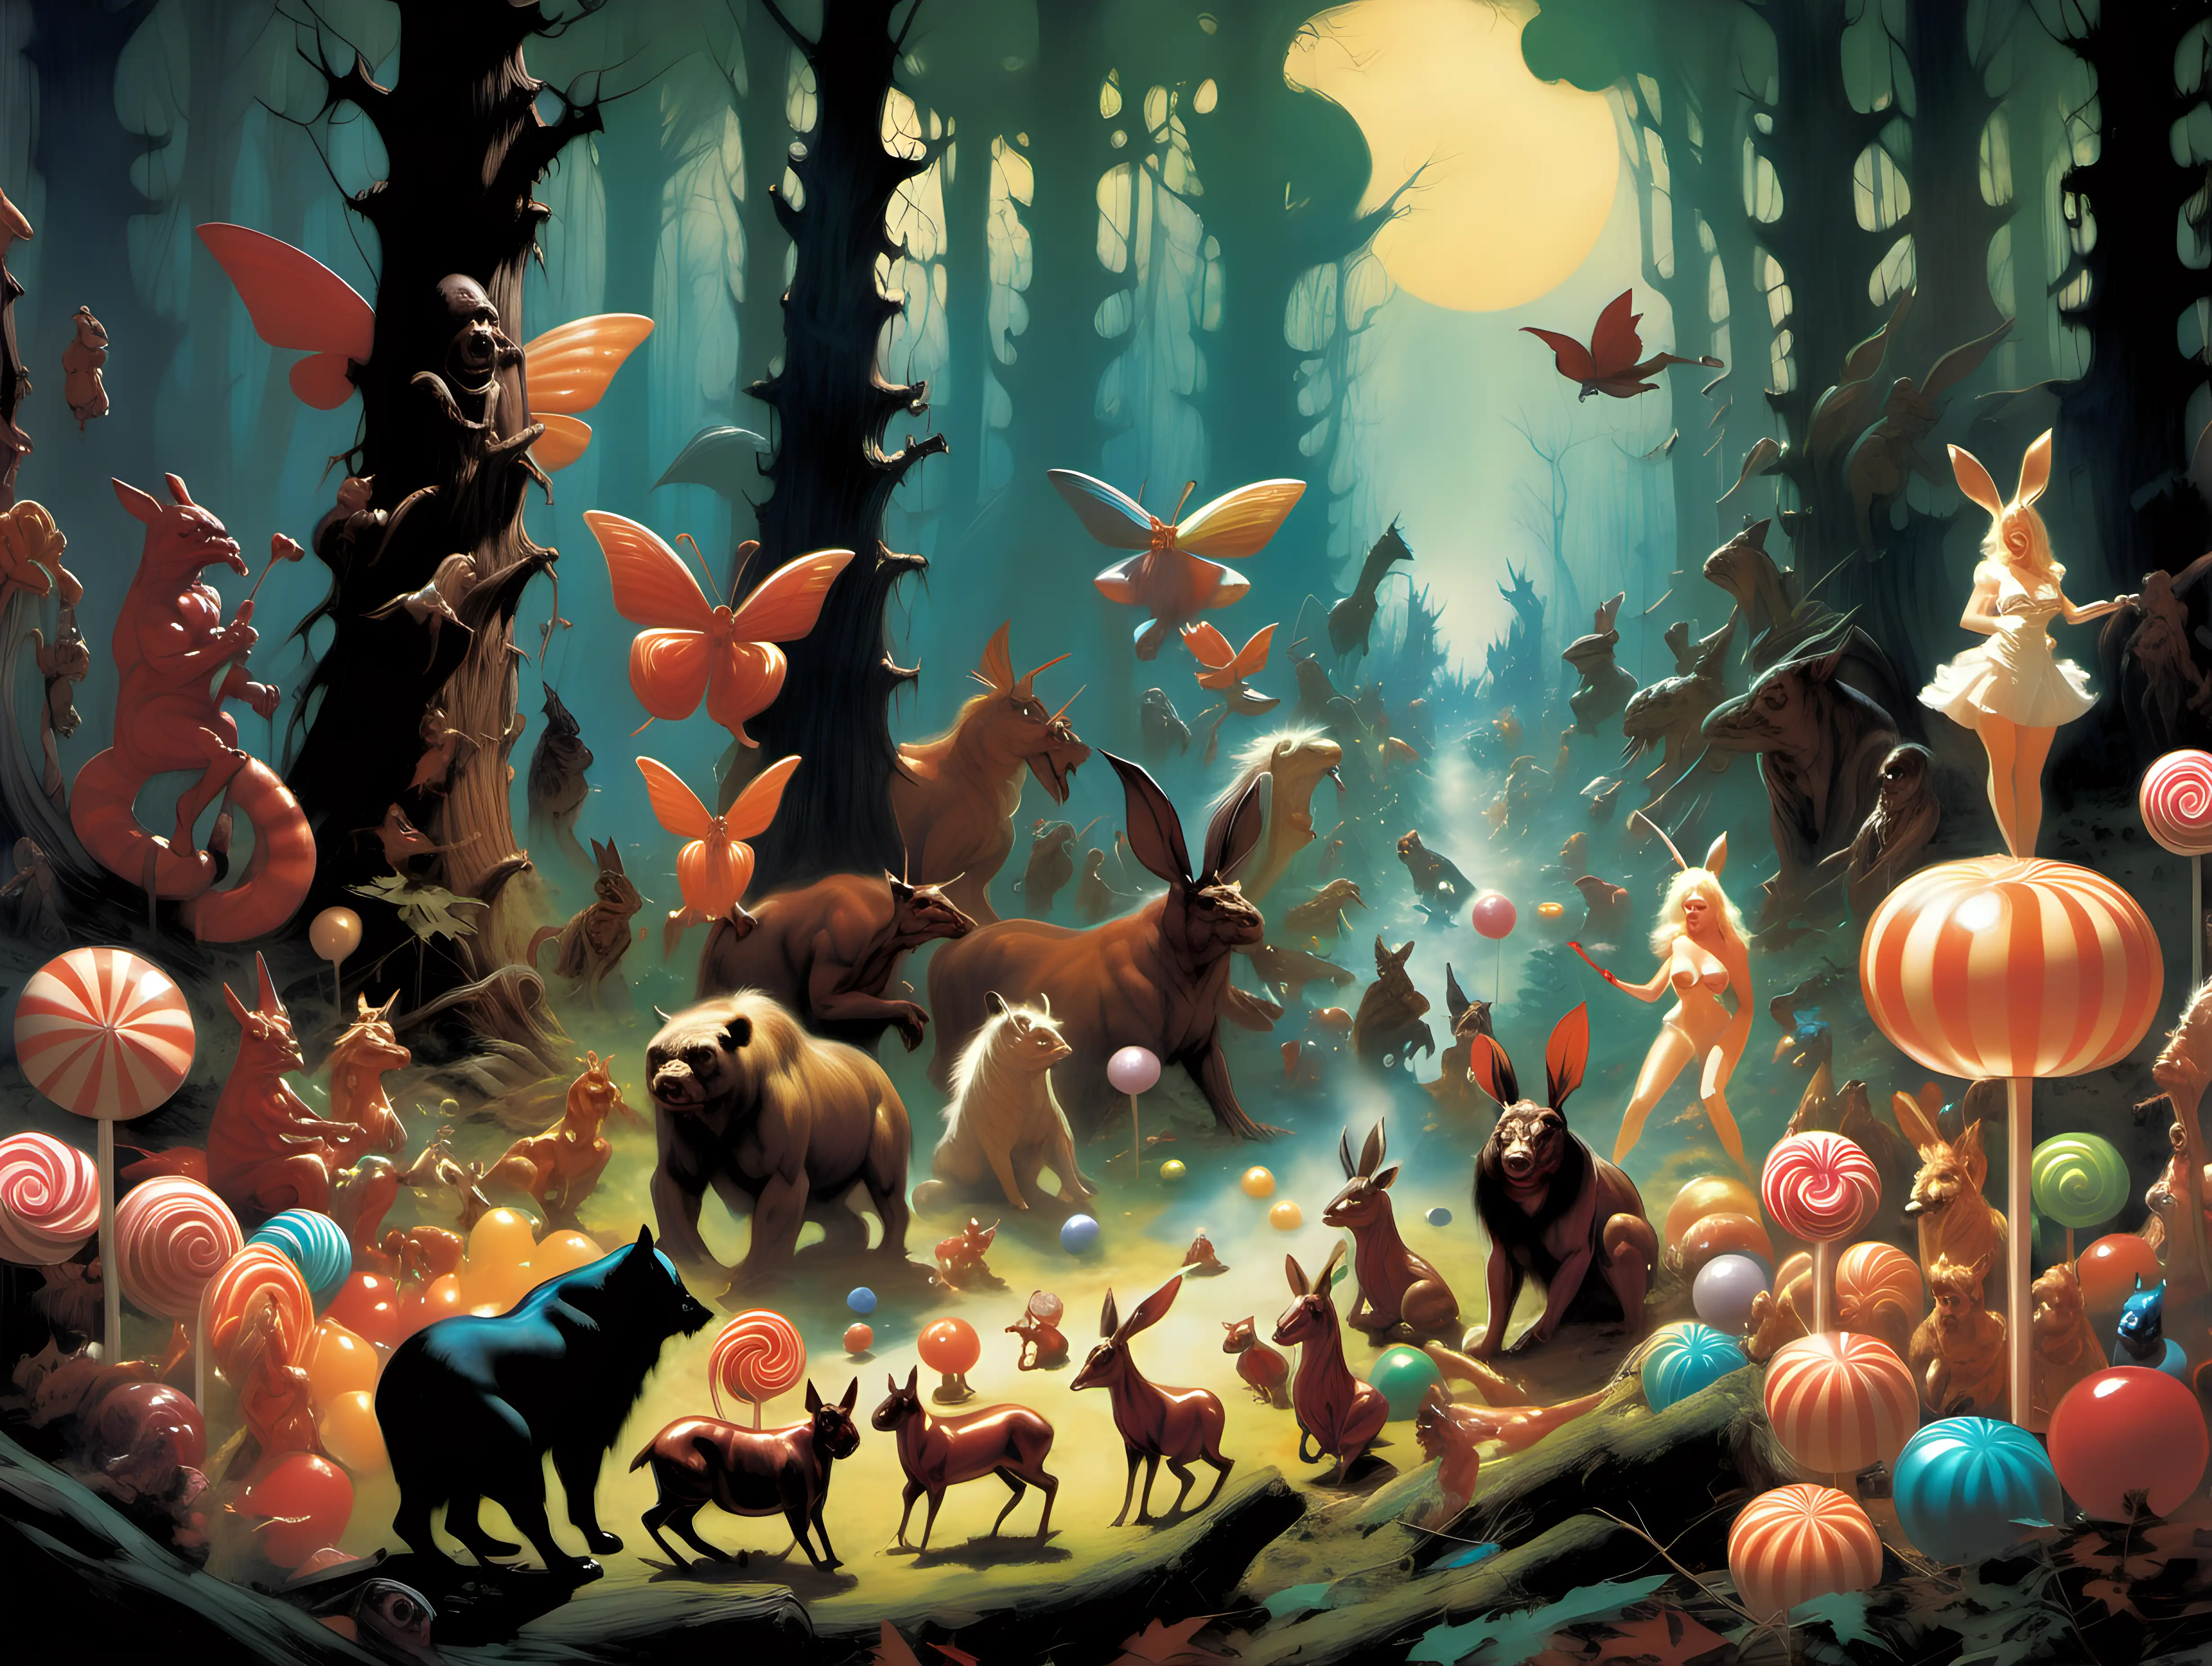 Enchanted Forest Candy Tale with Imaginary Creatures Frank Frazetta Inspired Art